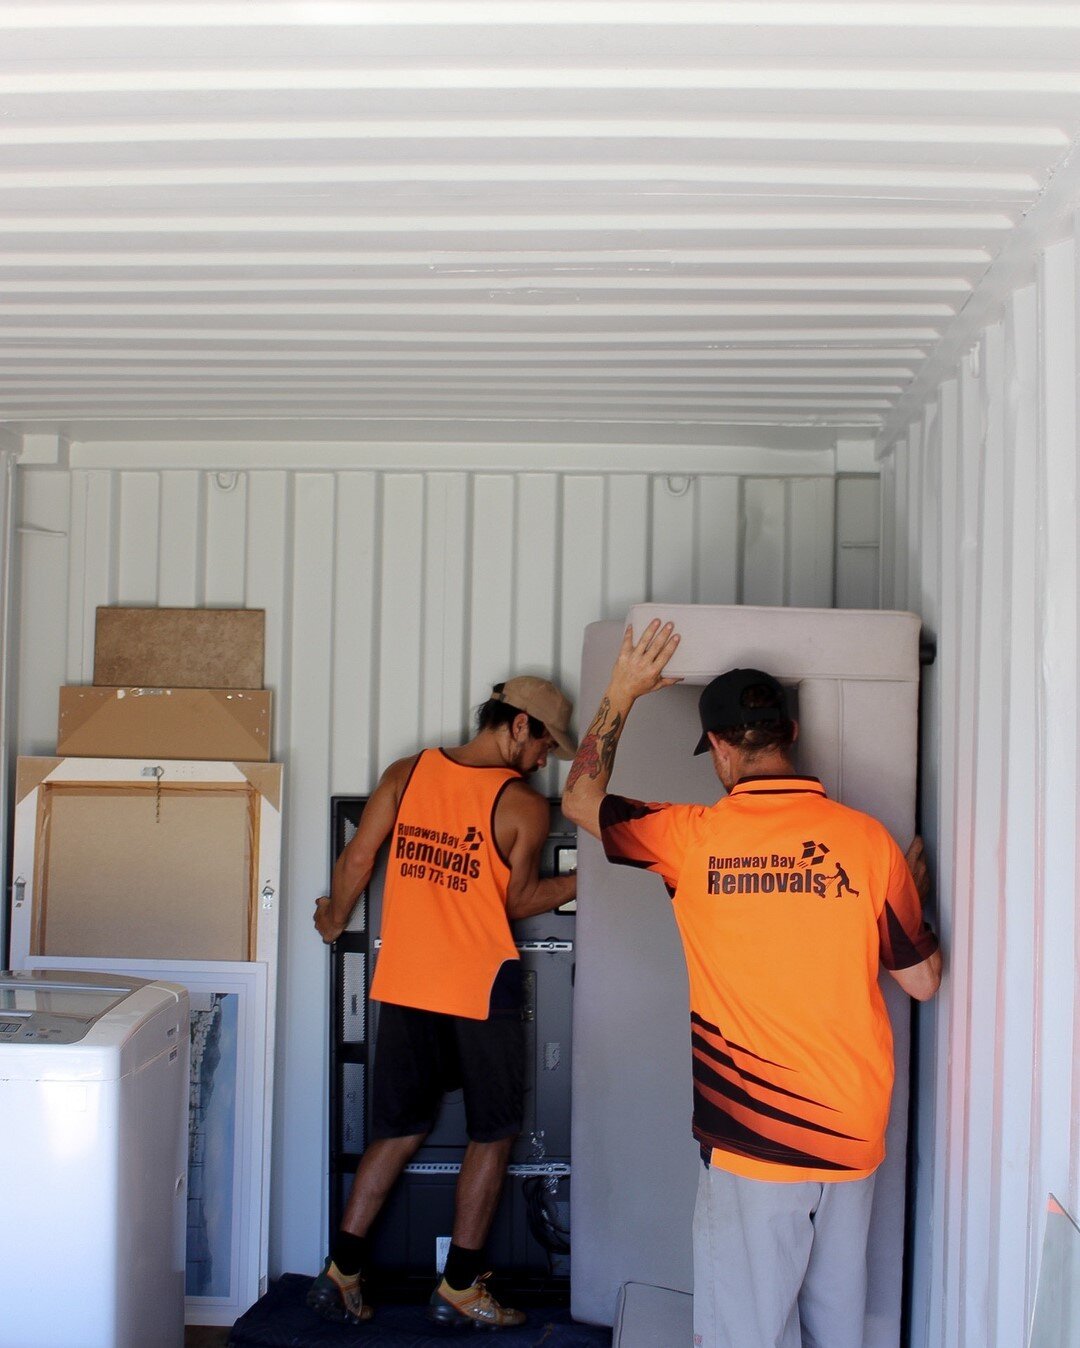 Moving Made Easy with Runaway Bay Removals!⠀⠀⠀⠀⠀⠀⠀⠀⠀
⠀⠀⠀⠀⠀⠀⠀⠀⠀
#removals #goldcoast #sydney #moving #rental #truck #goldcoastremovals #sydneytogoldcoast #goldcoastsydney #queensland #nsw #trustworthy #removaltrucks #movingoffice #movinghouse #bestrem